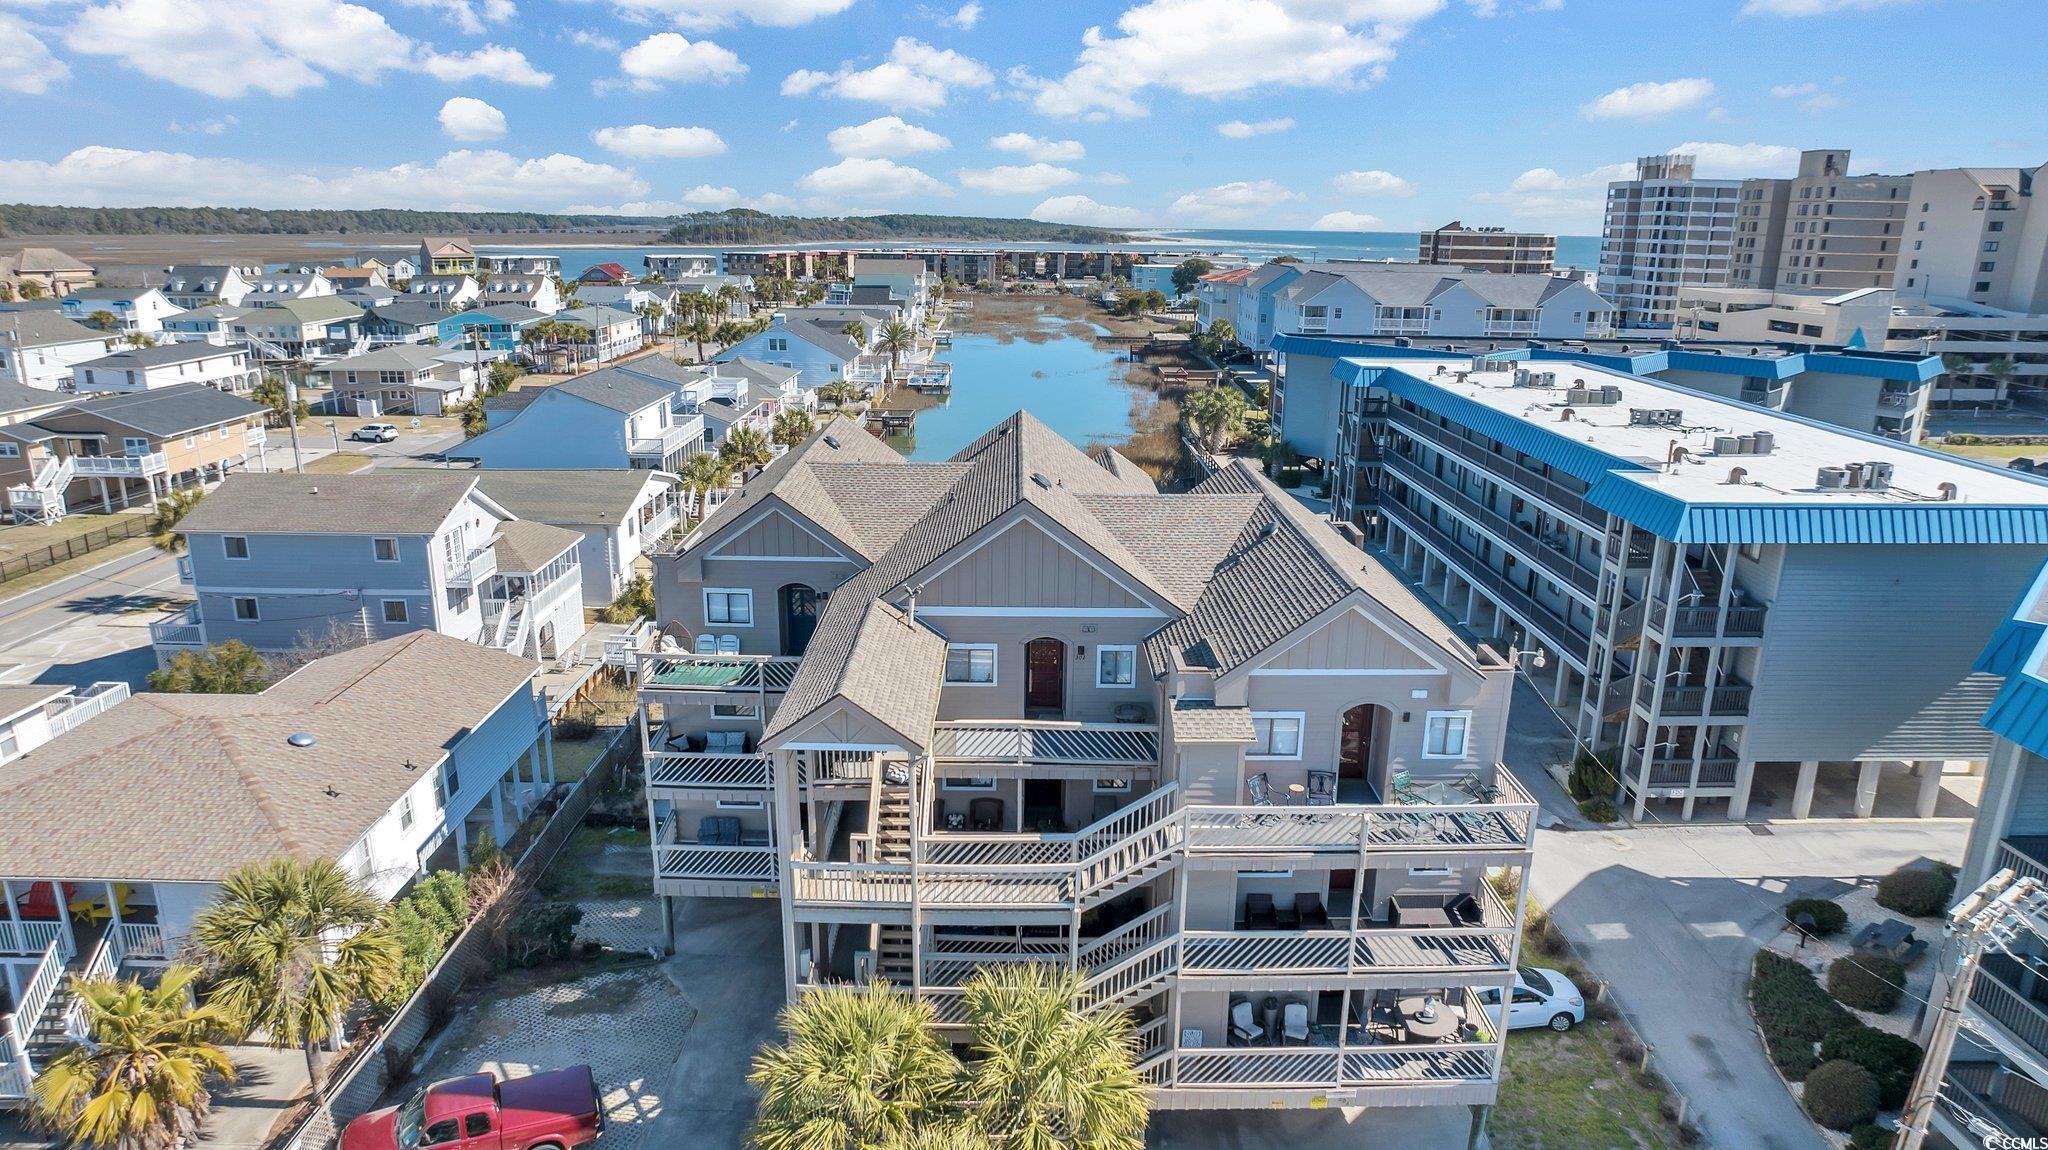 here's your chance to own a piece of paradise in beautiful cherry grove beach, located at the northern tip of north myrtle beach!  this 2 bedroom, 2 bathroom unit offers breathtaking water views from the back deck and is located just steps to the beach.  just a few blocks away is "the point" where the inlet meets the beach.  this spot is a local's favorite that offers views of waites island, great fishing, dolphin watching, and shelling.  after a day at the beach, owners and guests can enjoy fishing, crabbing, or a ride in the kayak from the condo complex's private dock on the marsh.  nearby amenities include a variety of exceptional restaurants (lots of local seafood fare), shopping, entertainment, and the famous cherry grove pier.  units in this complex don't come available often, so schedule your showing today!  all information is deemed reliable, but verification is the responsibility of the buyer.